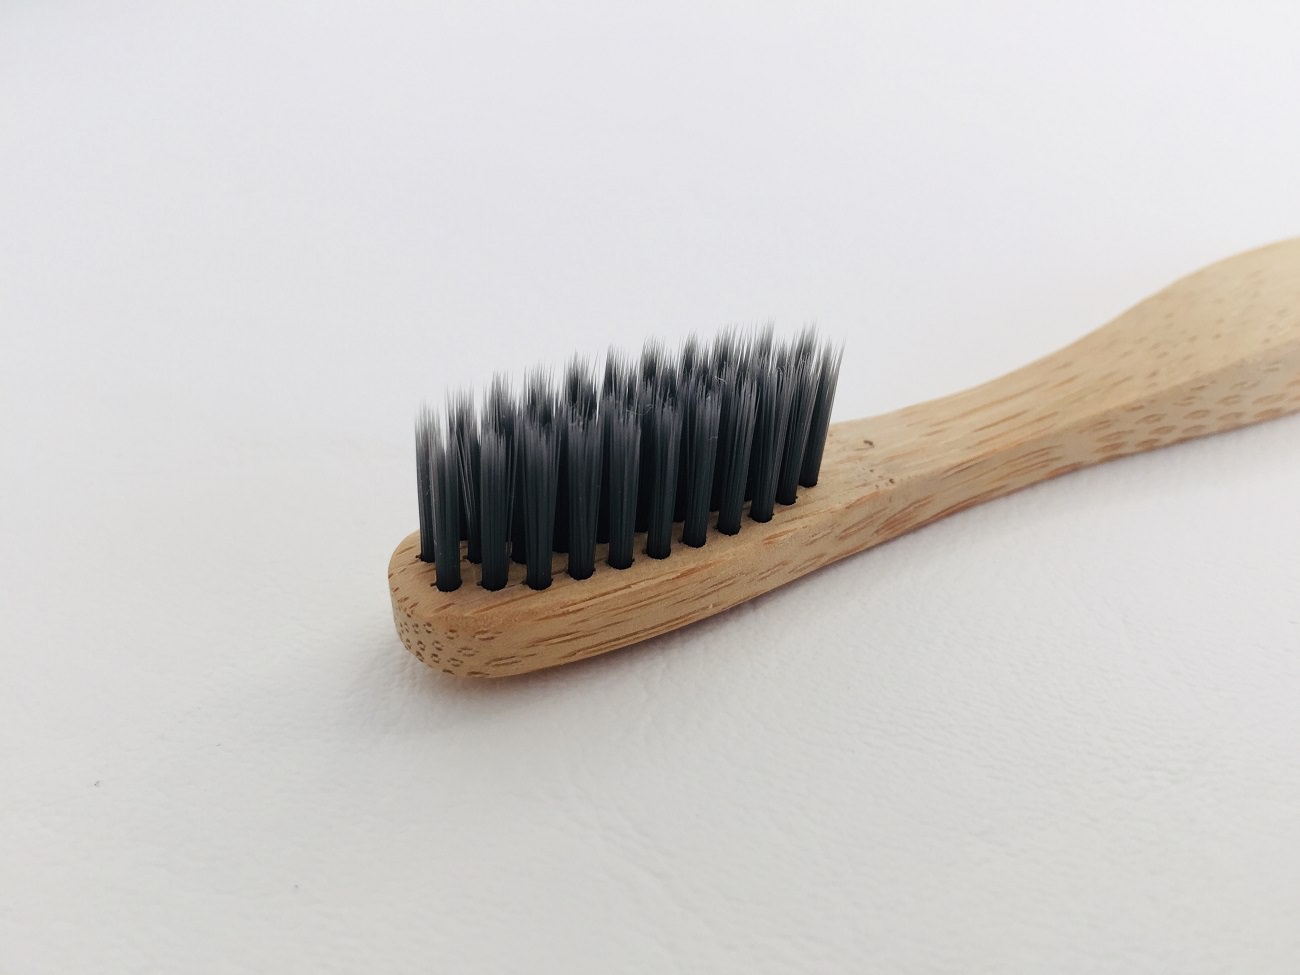 The charcoal infused bristles on the Grants Bamboo Toothbrush